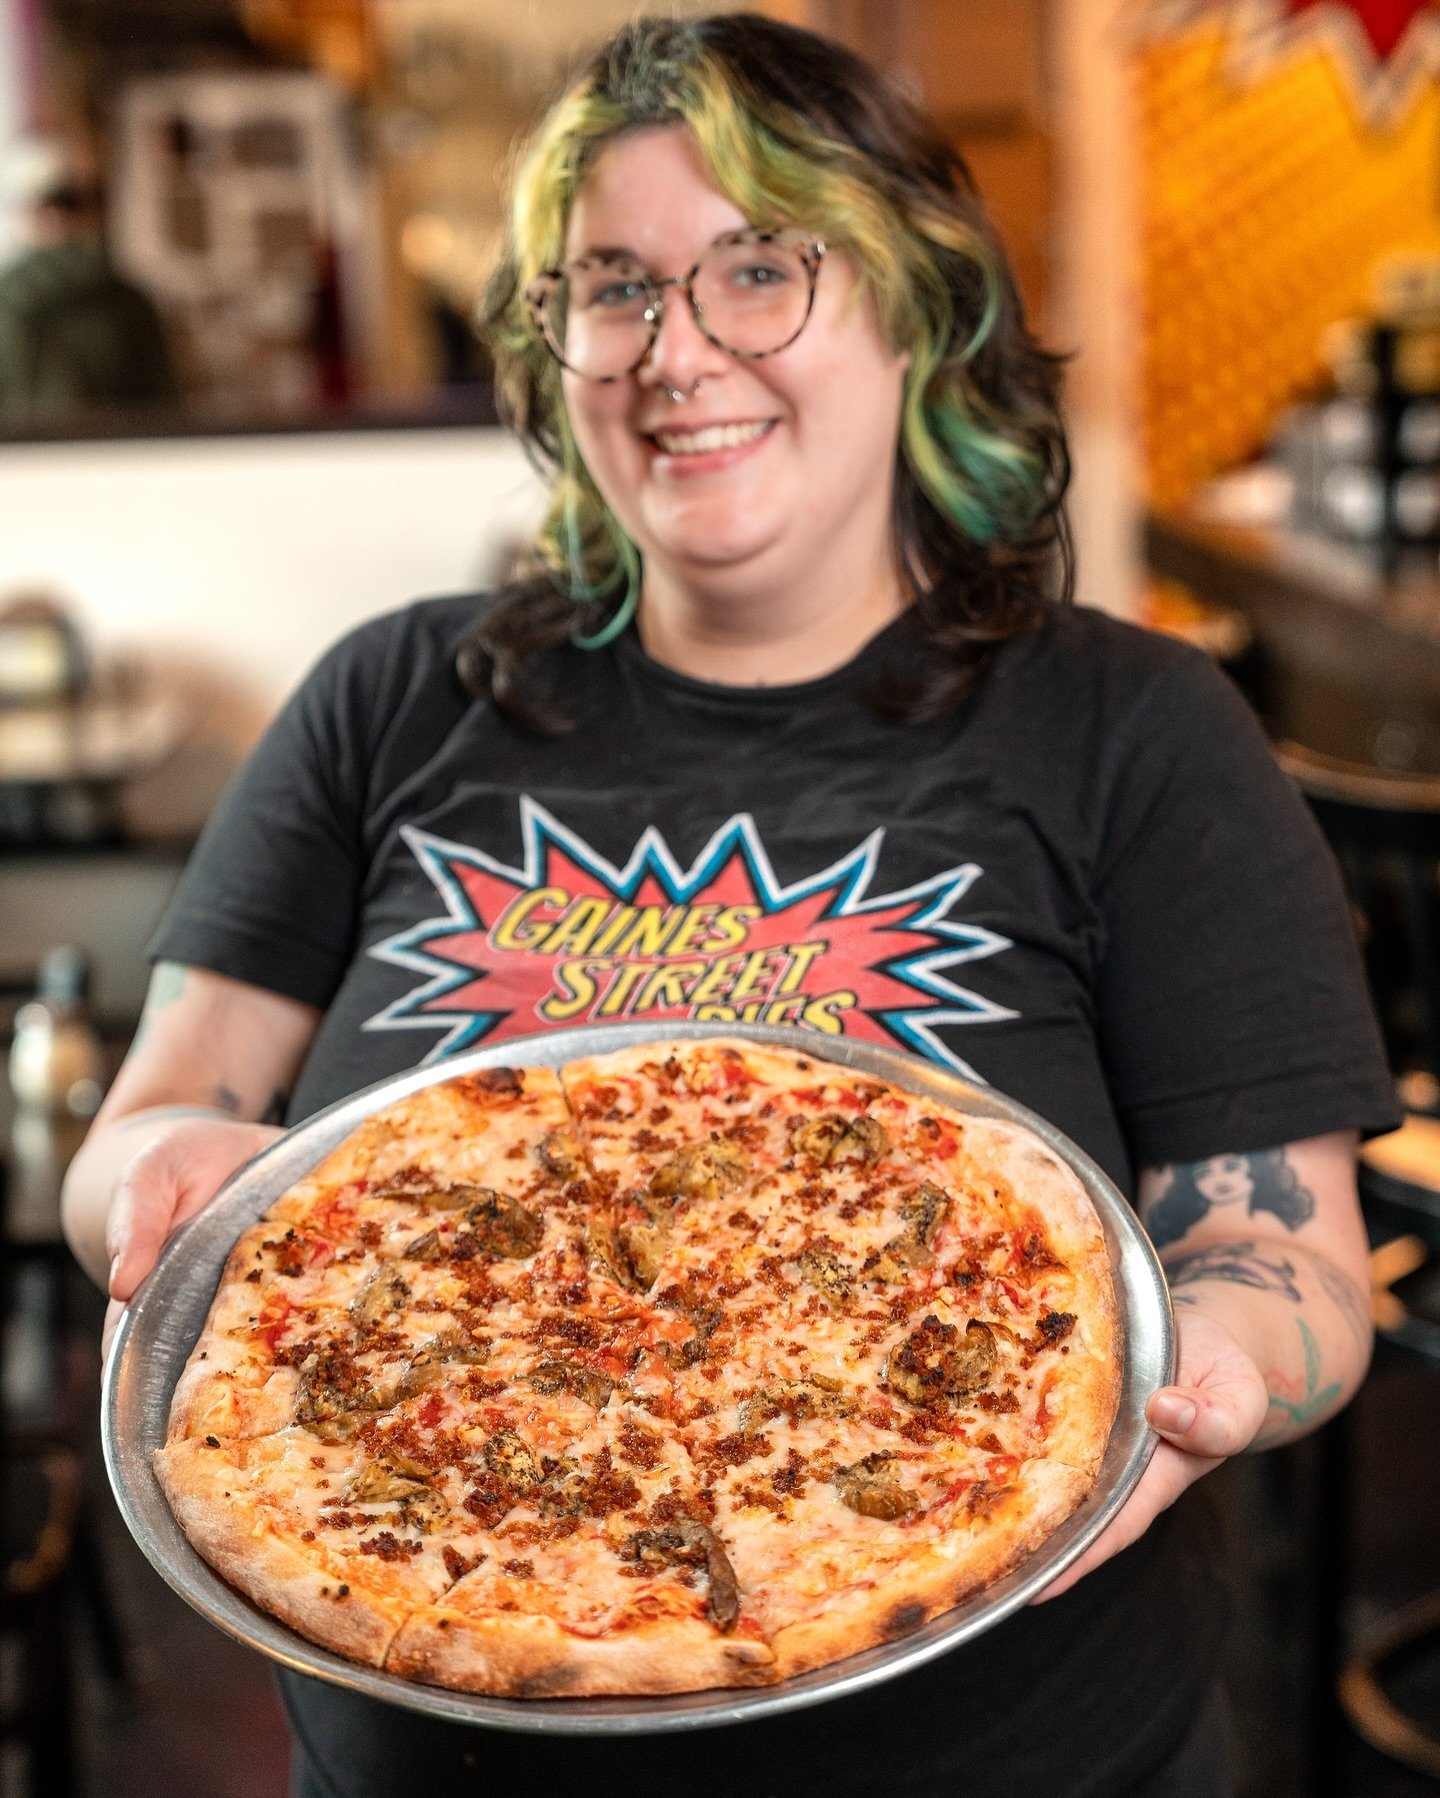 There&rsquo;s only two weeks left to try April&rsquo;s Vegan POTM: the Moral Mitchka!
Vegan Cheese, Vegan Sausage, Eggplant, and Double Garlic.
Even better with our vegan ranch, stop in this week to give this deliciously VEGAN pizza a try!
Stop by an